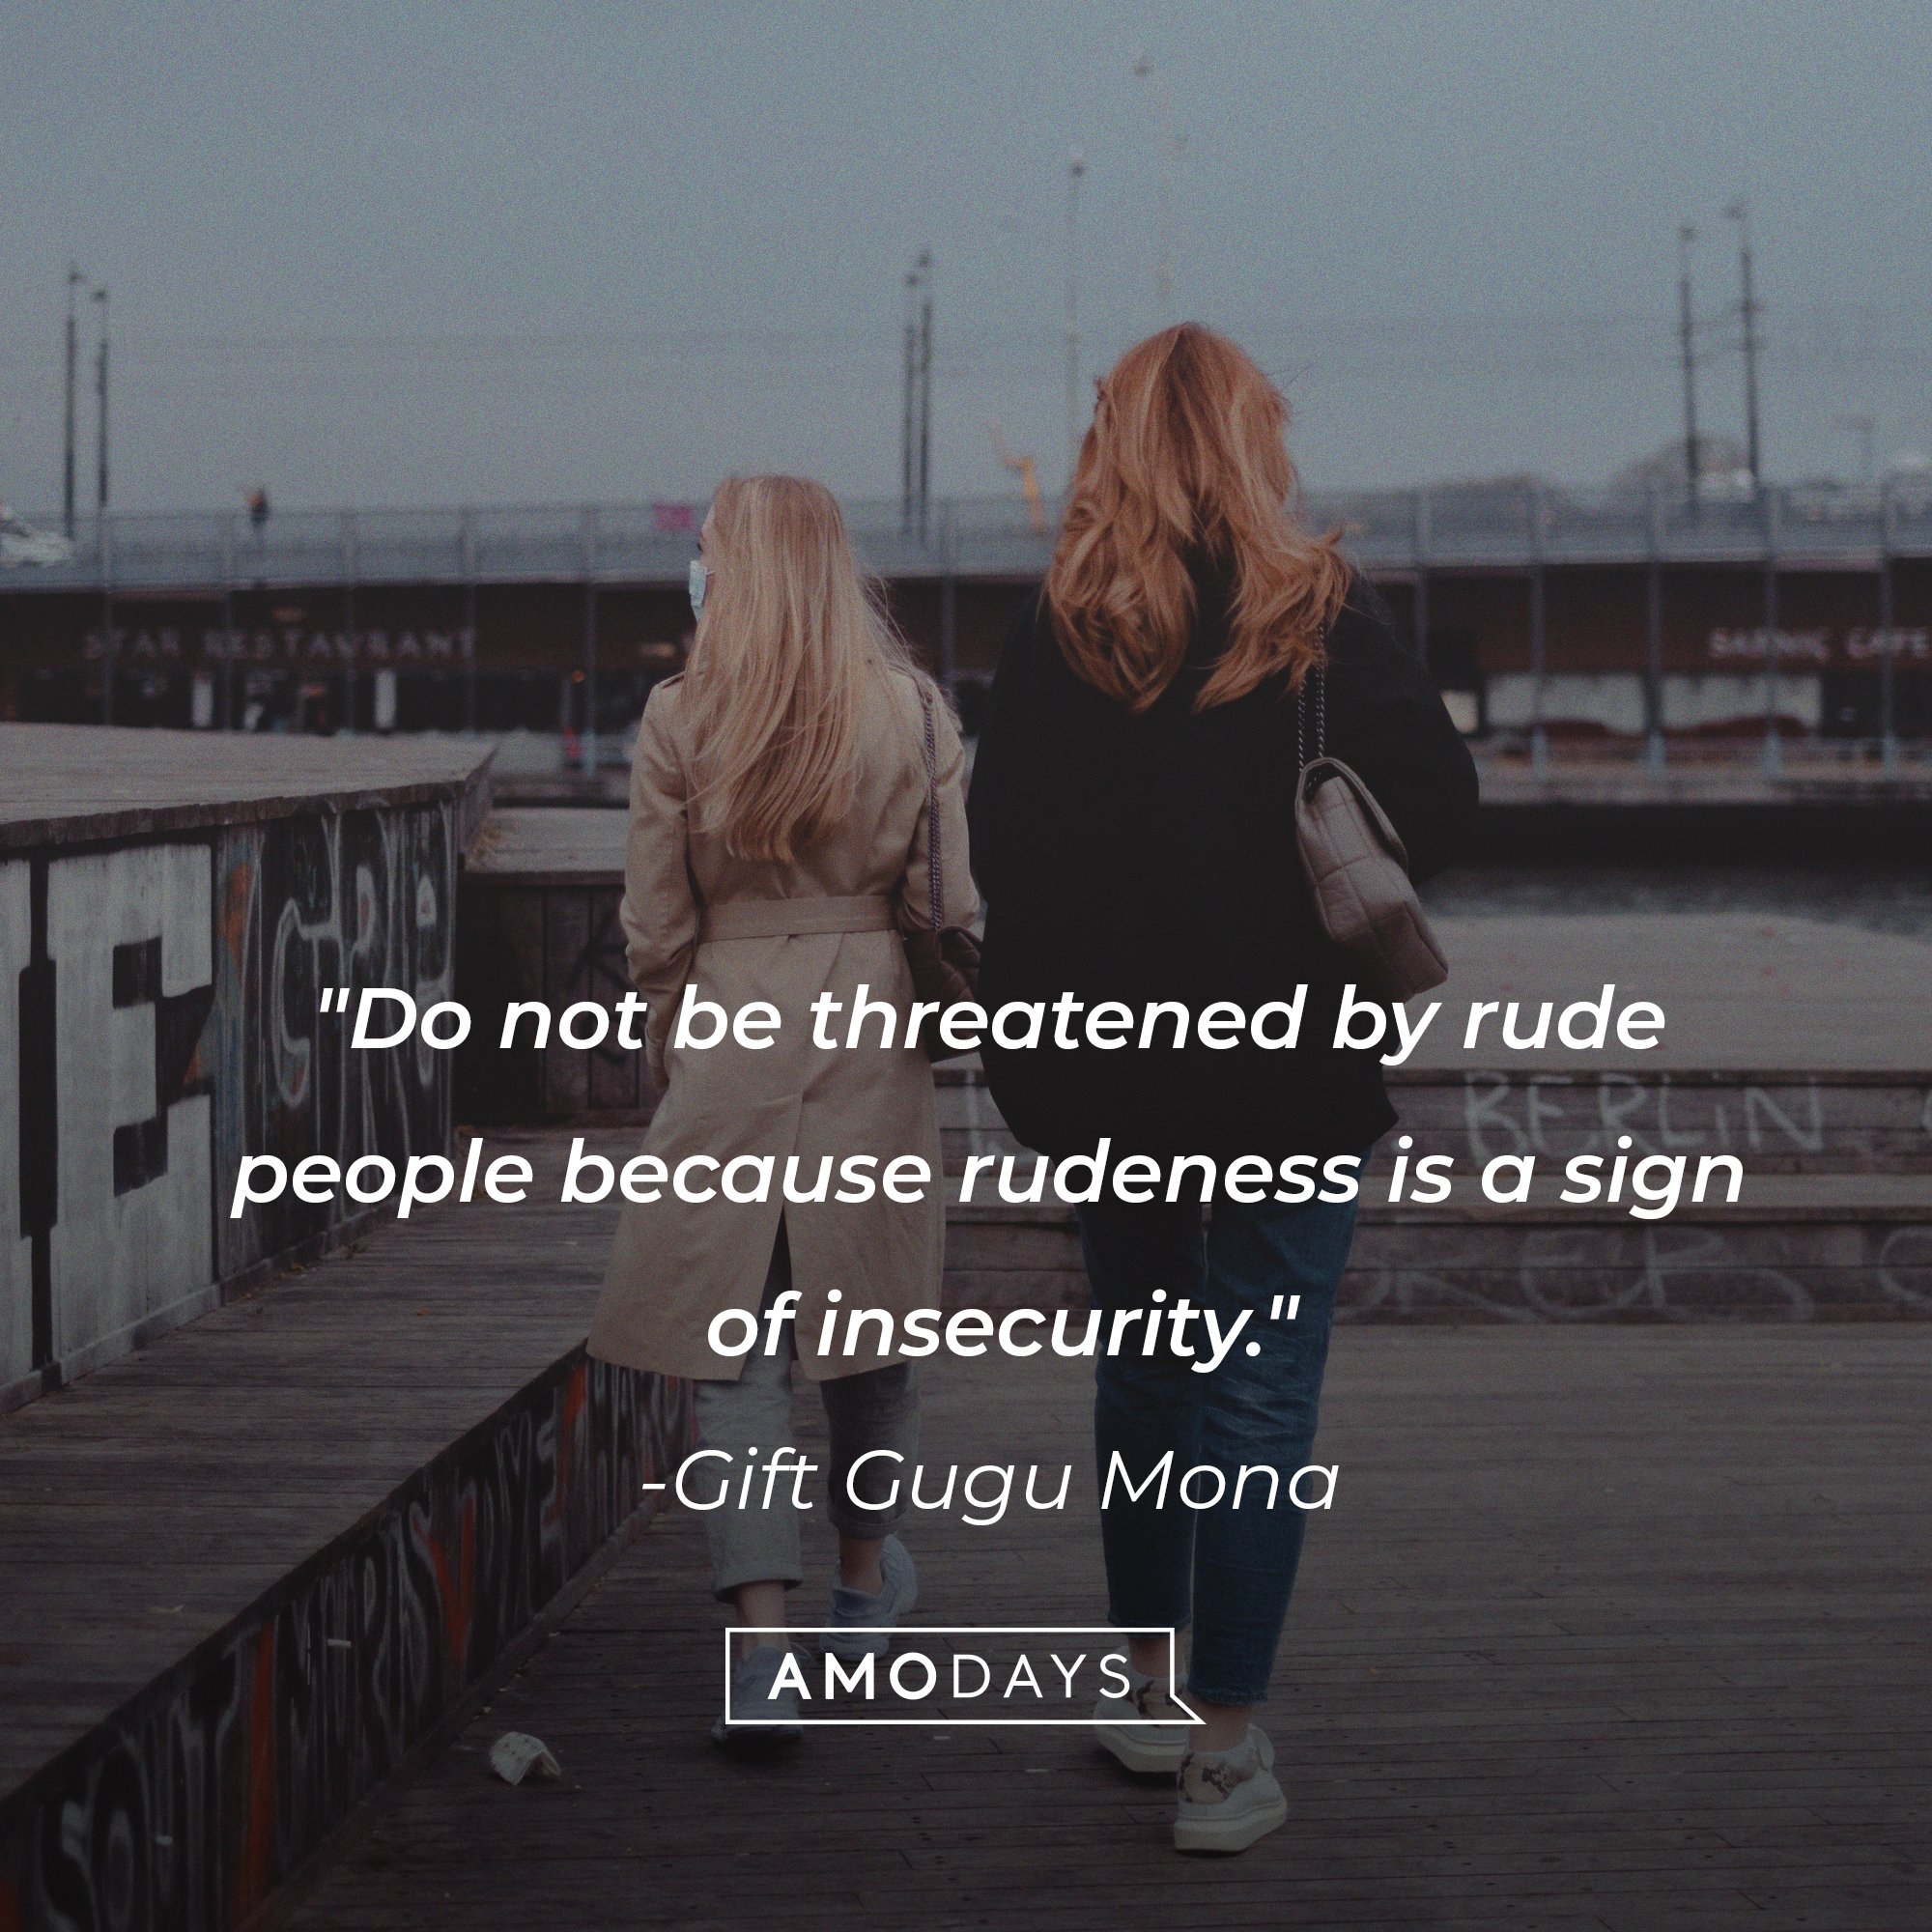 Gift Gugu Mona’s quote: "Do not be threatened by rude people because rudeness is a sign of insecurity." | Image: AmoDays